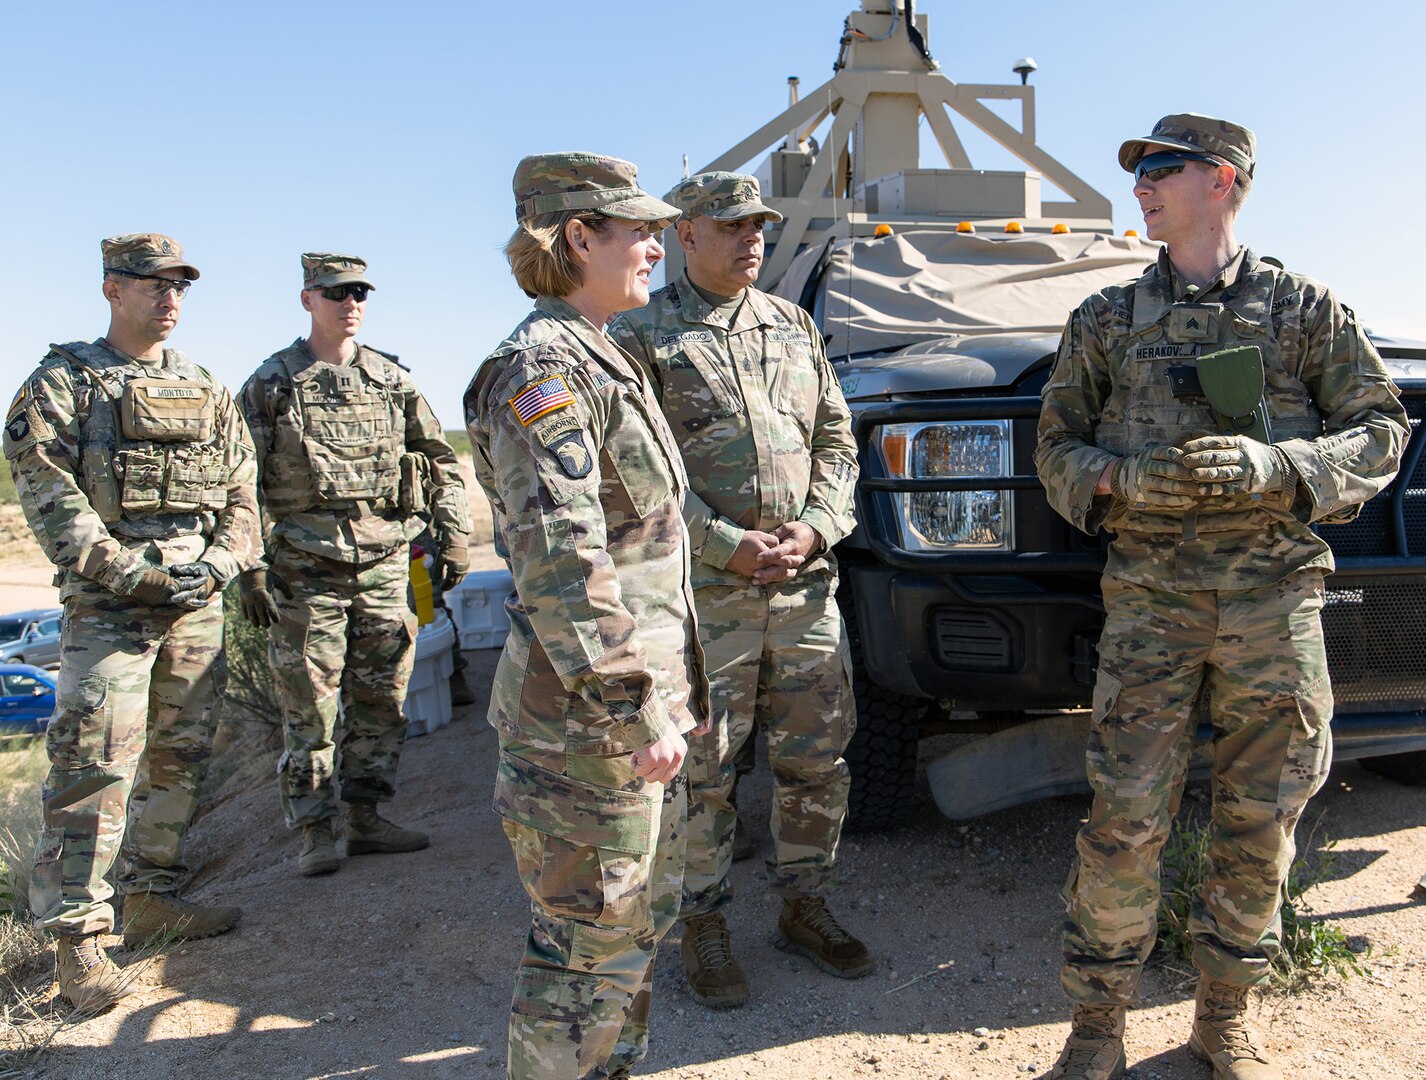 Sgt. Alexander Herakovich, an infantry team leader assigned to Bravo Company, 2nd Infantry Battalion, 4th Infantry Regiment, 3rd Brigade Combat Team, 10th Mountain Division, briefs Lt. Gen. Laura J. Richardson, Commanding General, U.S. Army North, and Command Sgt. Major Alberto Delgado, ARNORTH Senior Enlisted Advisor, on his roles and responsibilities at a mobile surveillance camera site near Tucson, Arizona, during their visit to service members serving along the U.S. southern border Nov. 26.